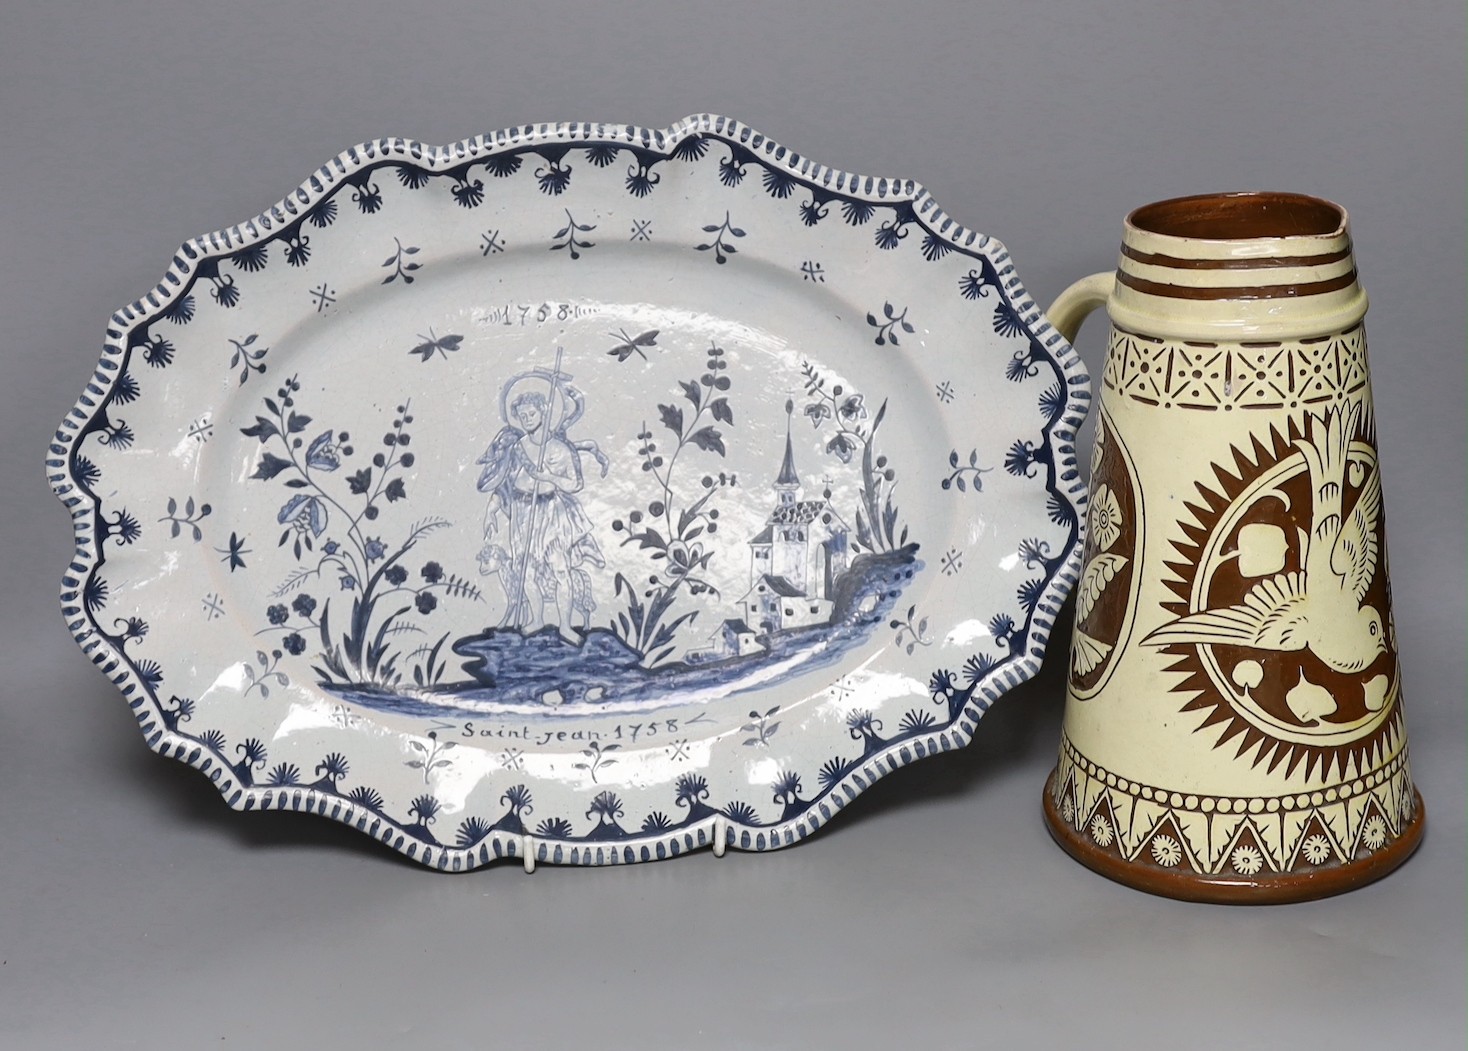 A Brannum sgraffito jug dated 1881 and a French faience serving dish, 42cm